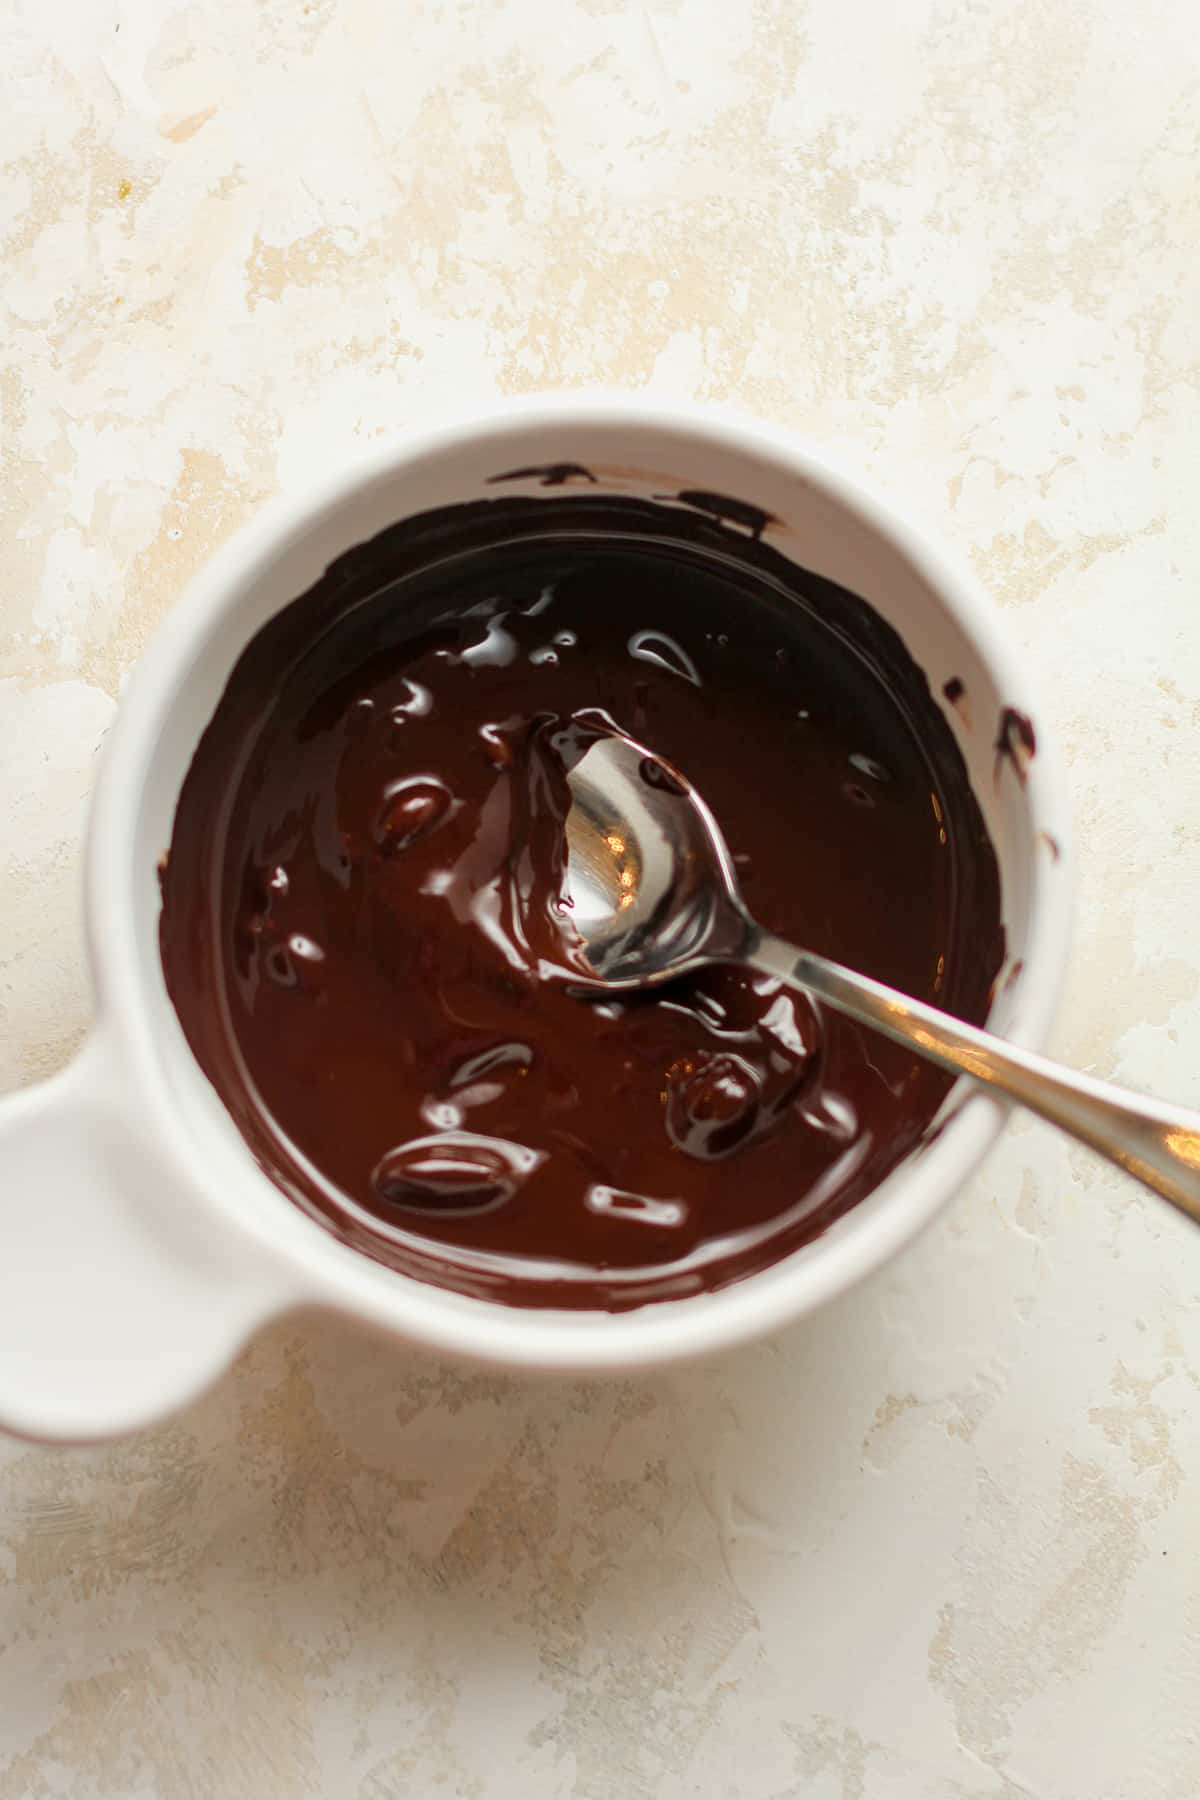 A bowl of the melted chocolate.